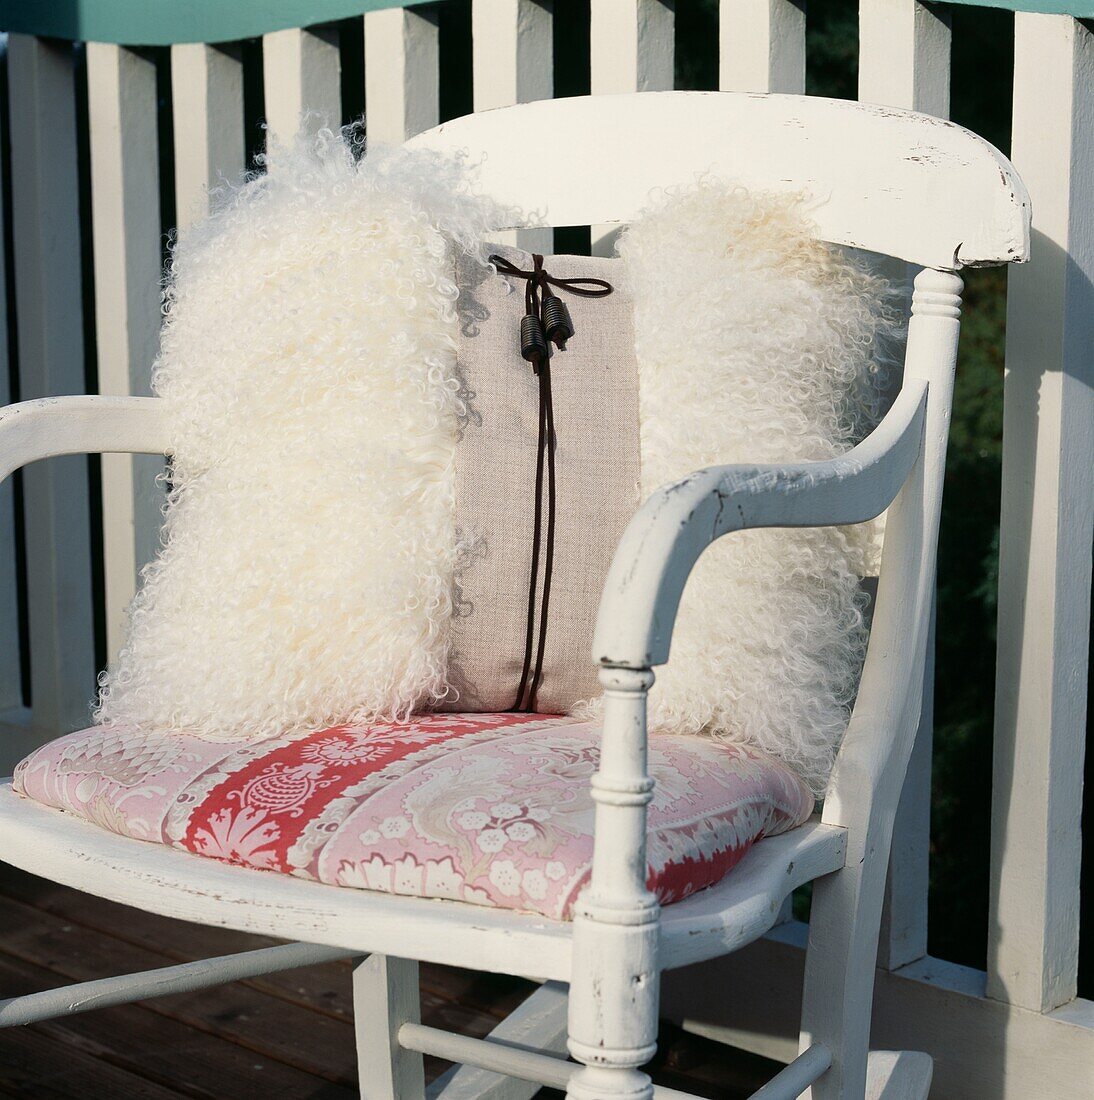 Wooden painted rocking chair on a balcony with fake fur cushion